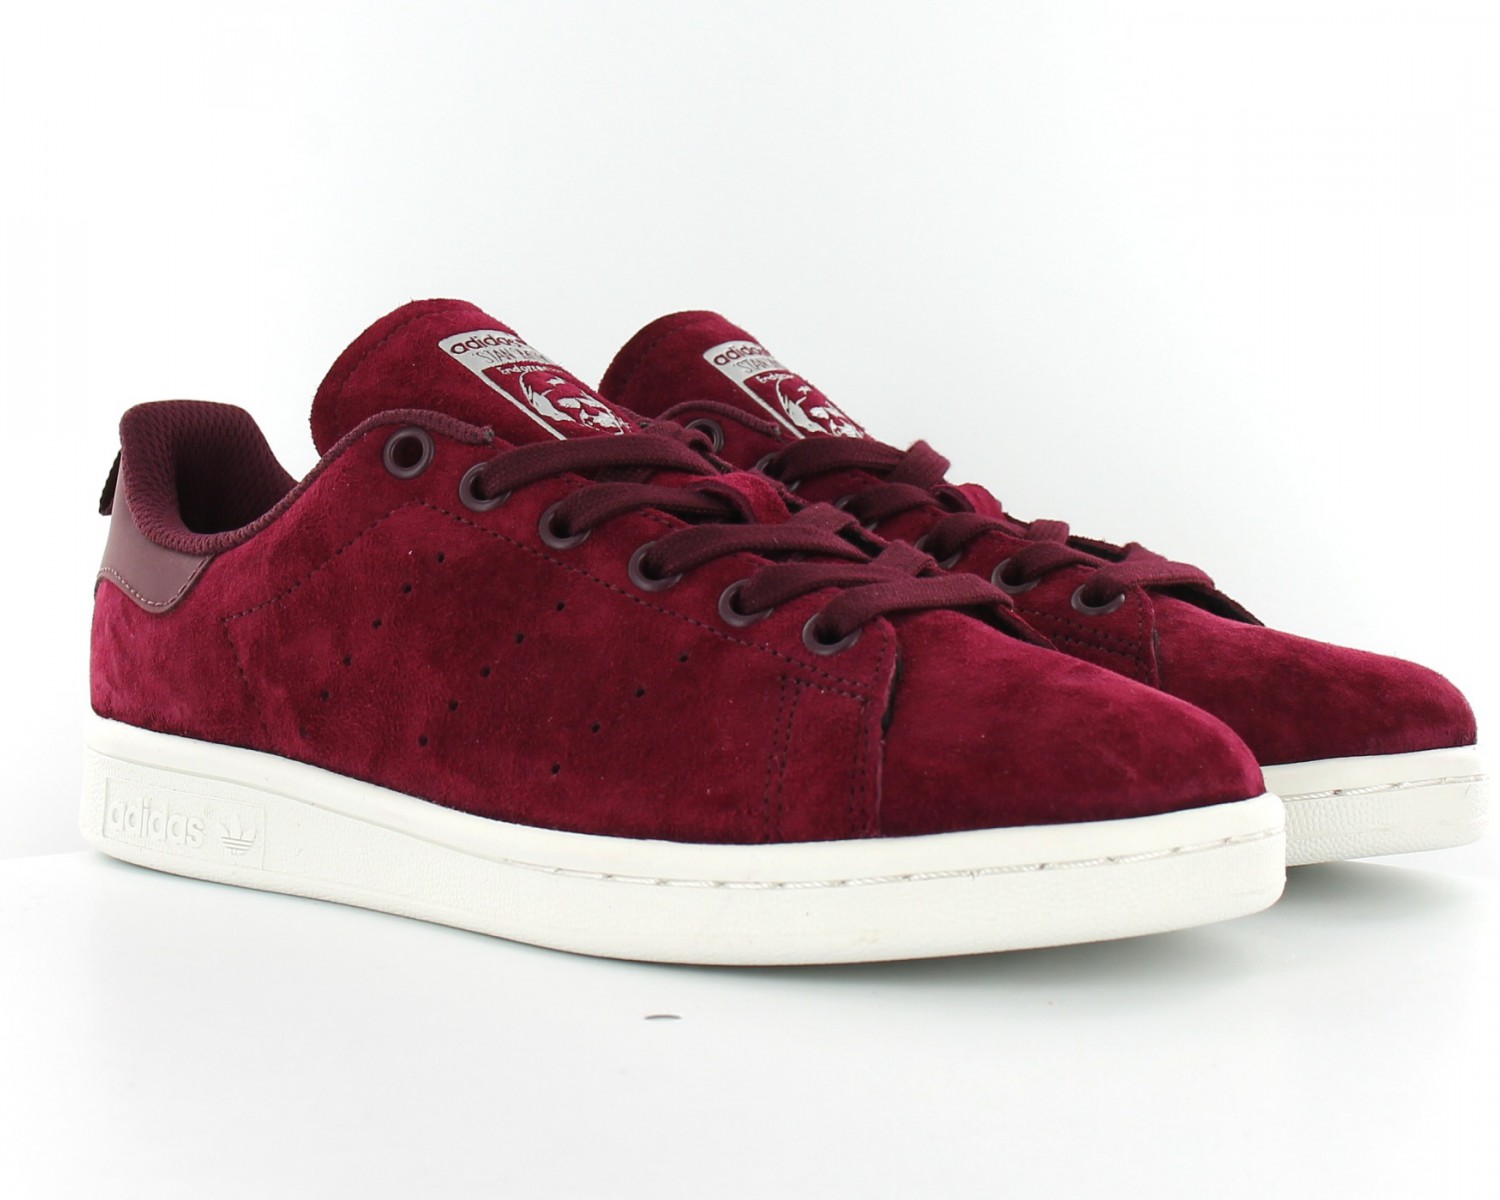 Mujer aceptable Muestra Adidas Stan Smith Bordeaux Portugal, SAVE 41% - abaroadrive.com